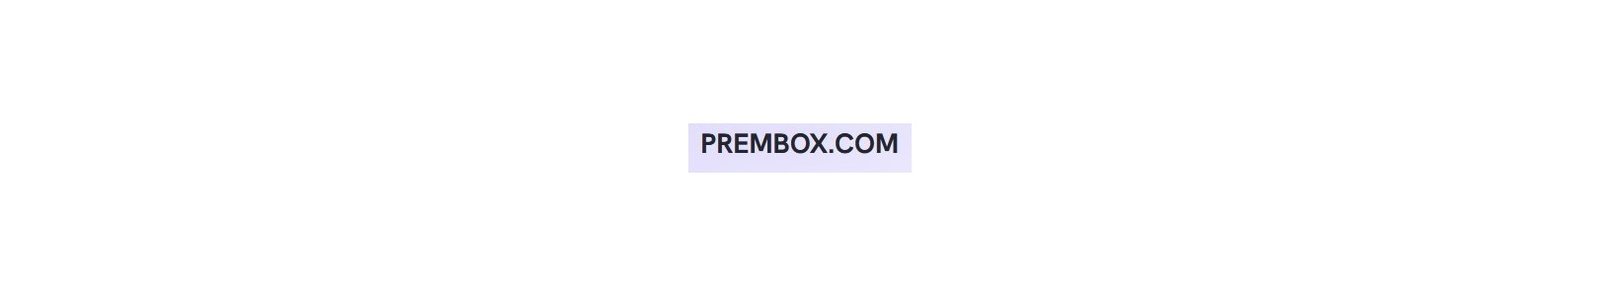 PremBox Premium account from official reseller Hotfilepremiumstore